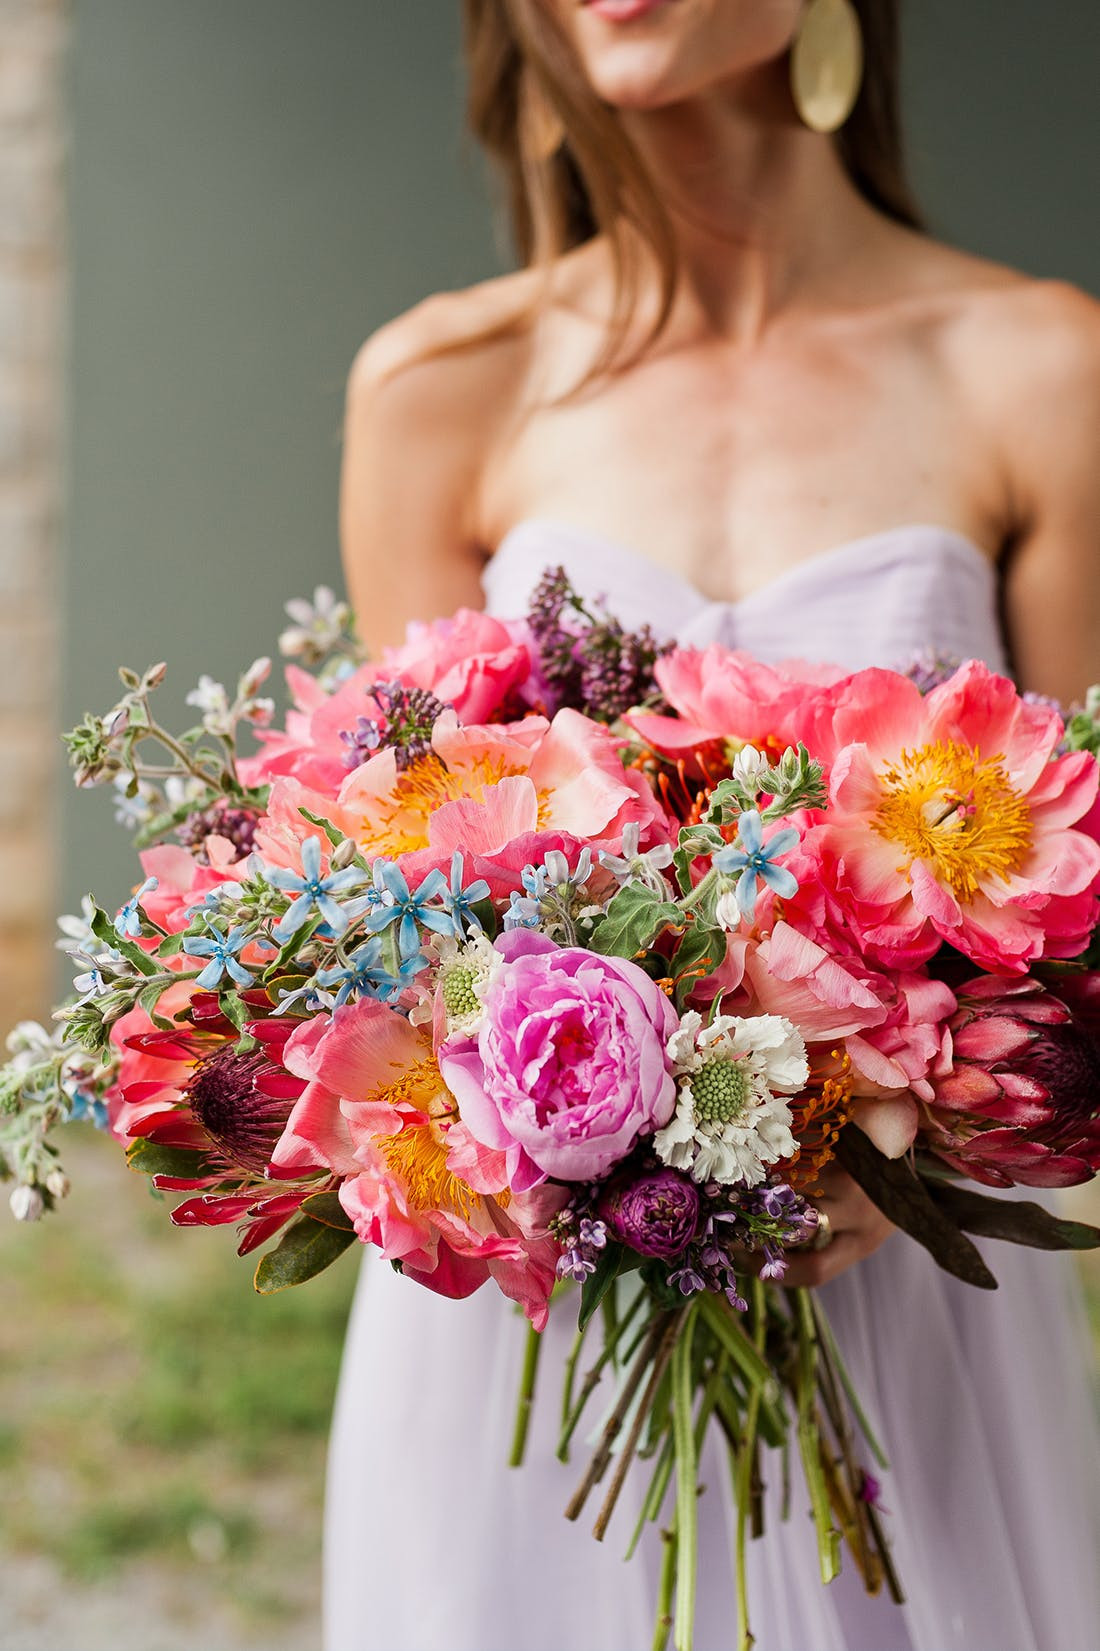 DIY Wedding Bouquets Ideas
 Check Out This Stunning Wedding Bouquet You Can DIY